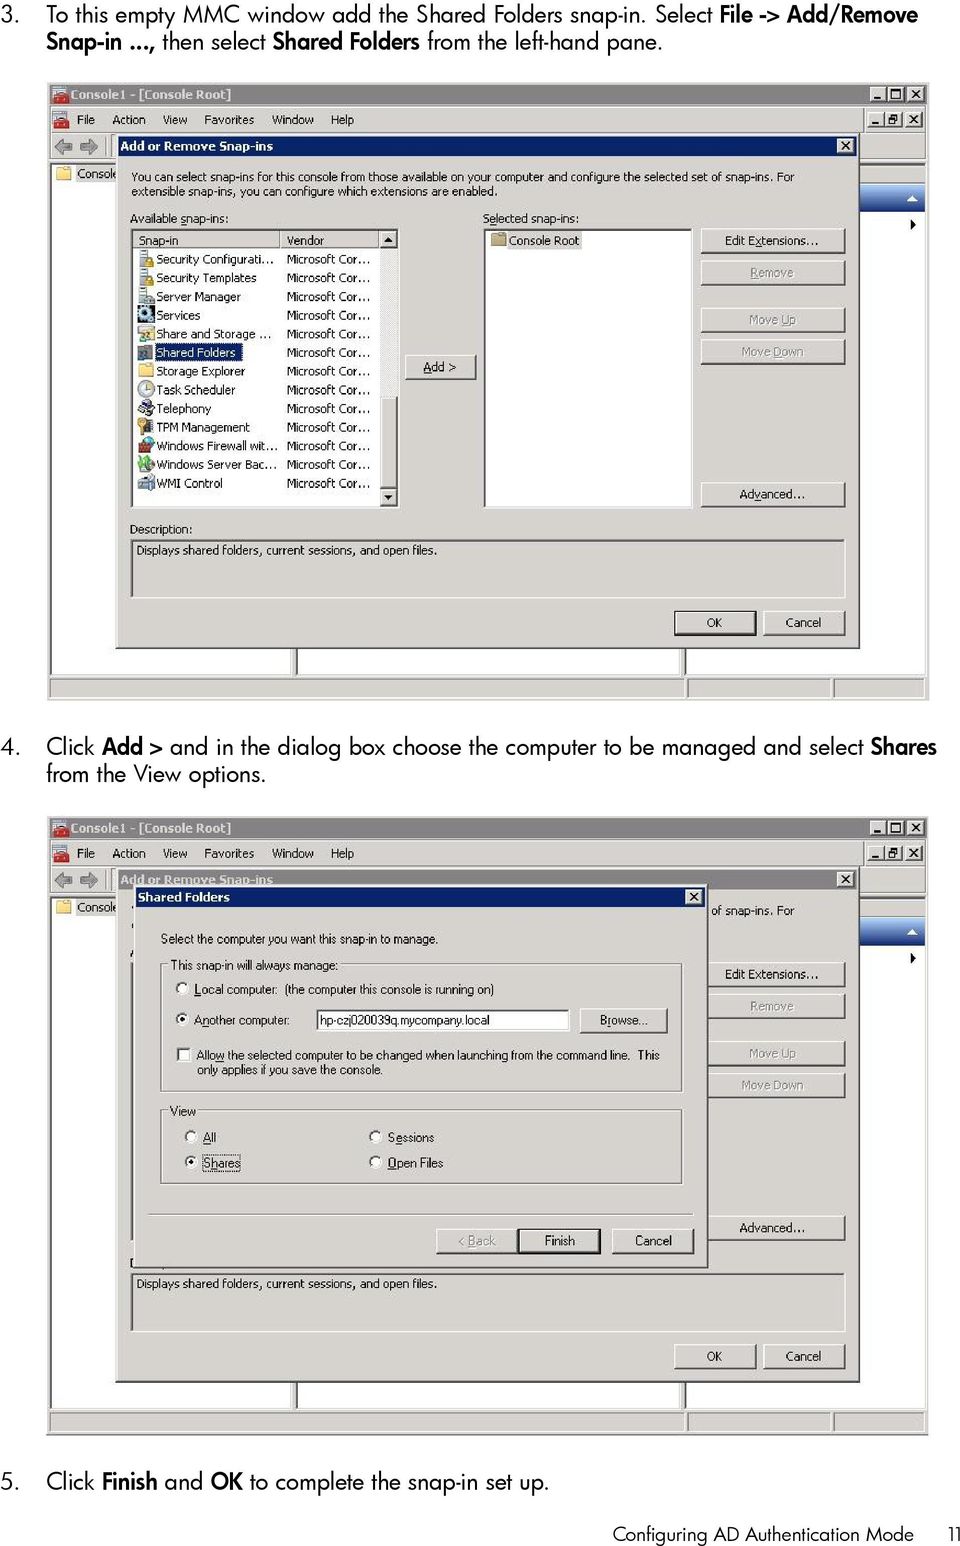 4. Click Add > and in the dialog box choose the computer to be managed and select Shares